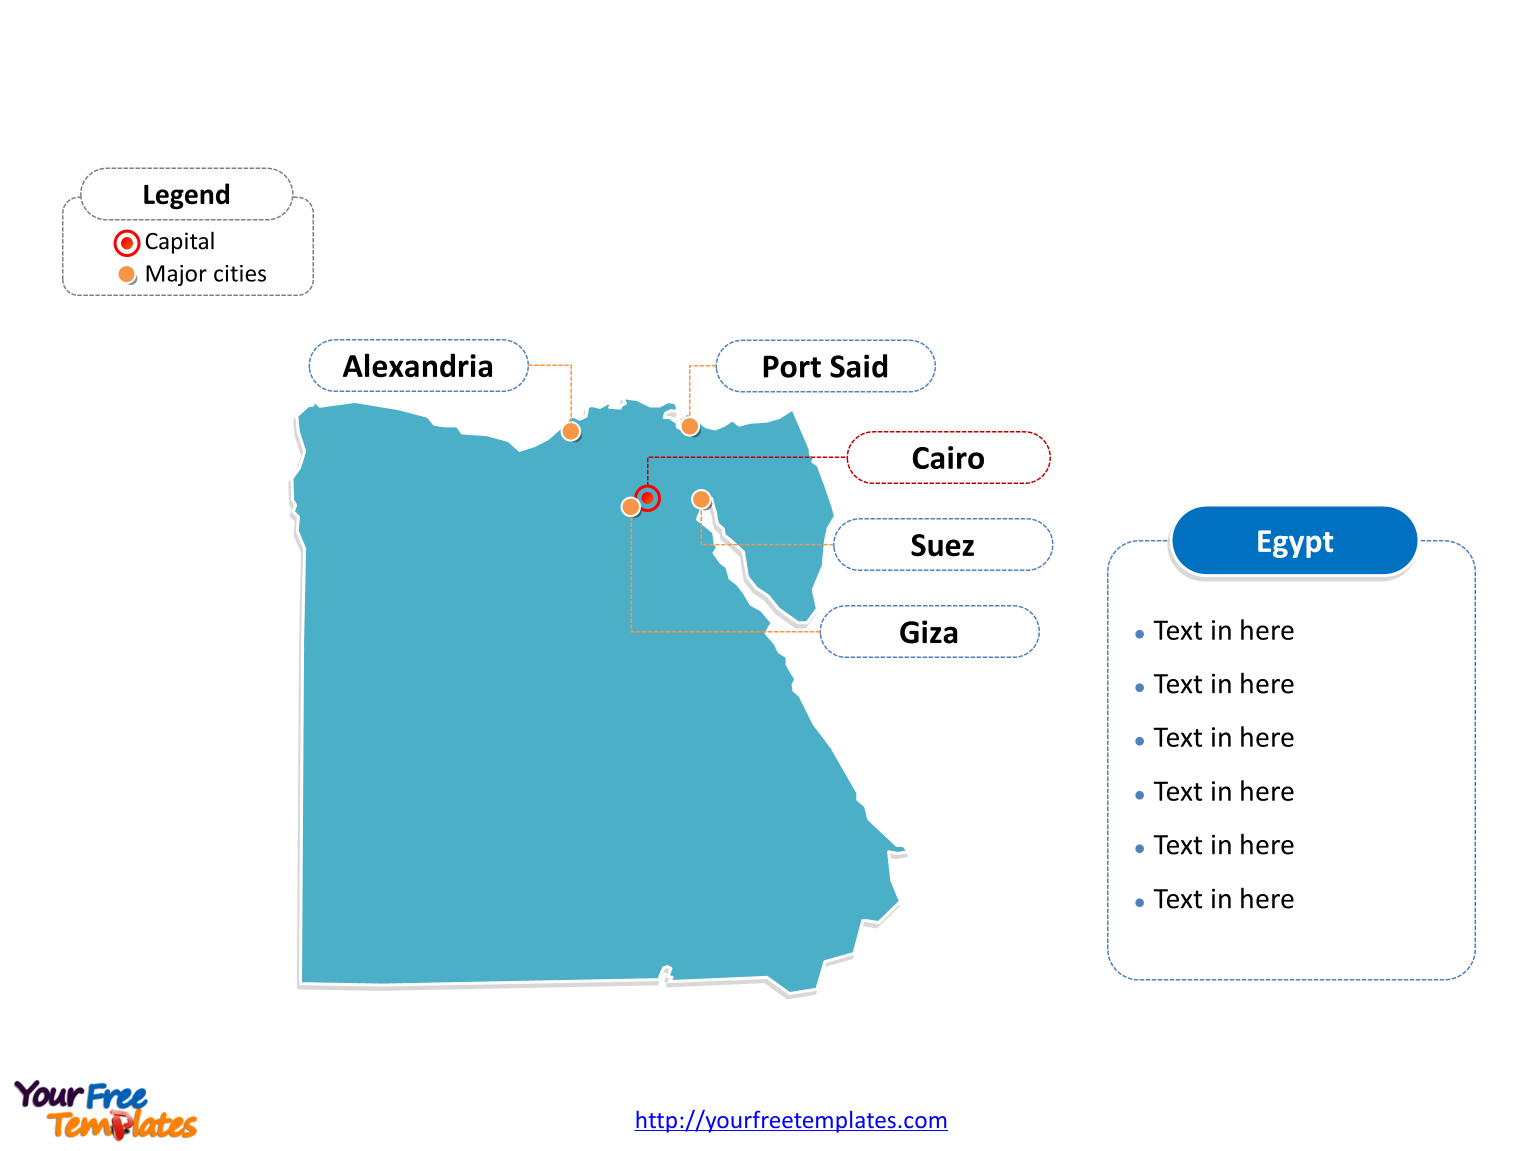 Egypt Outline map labeled with cities